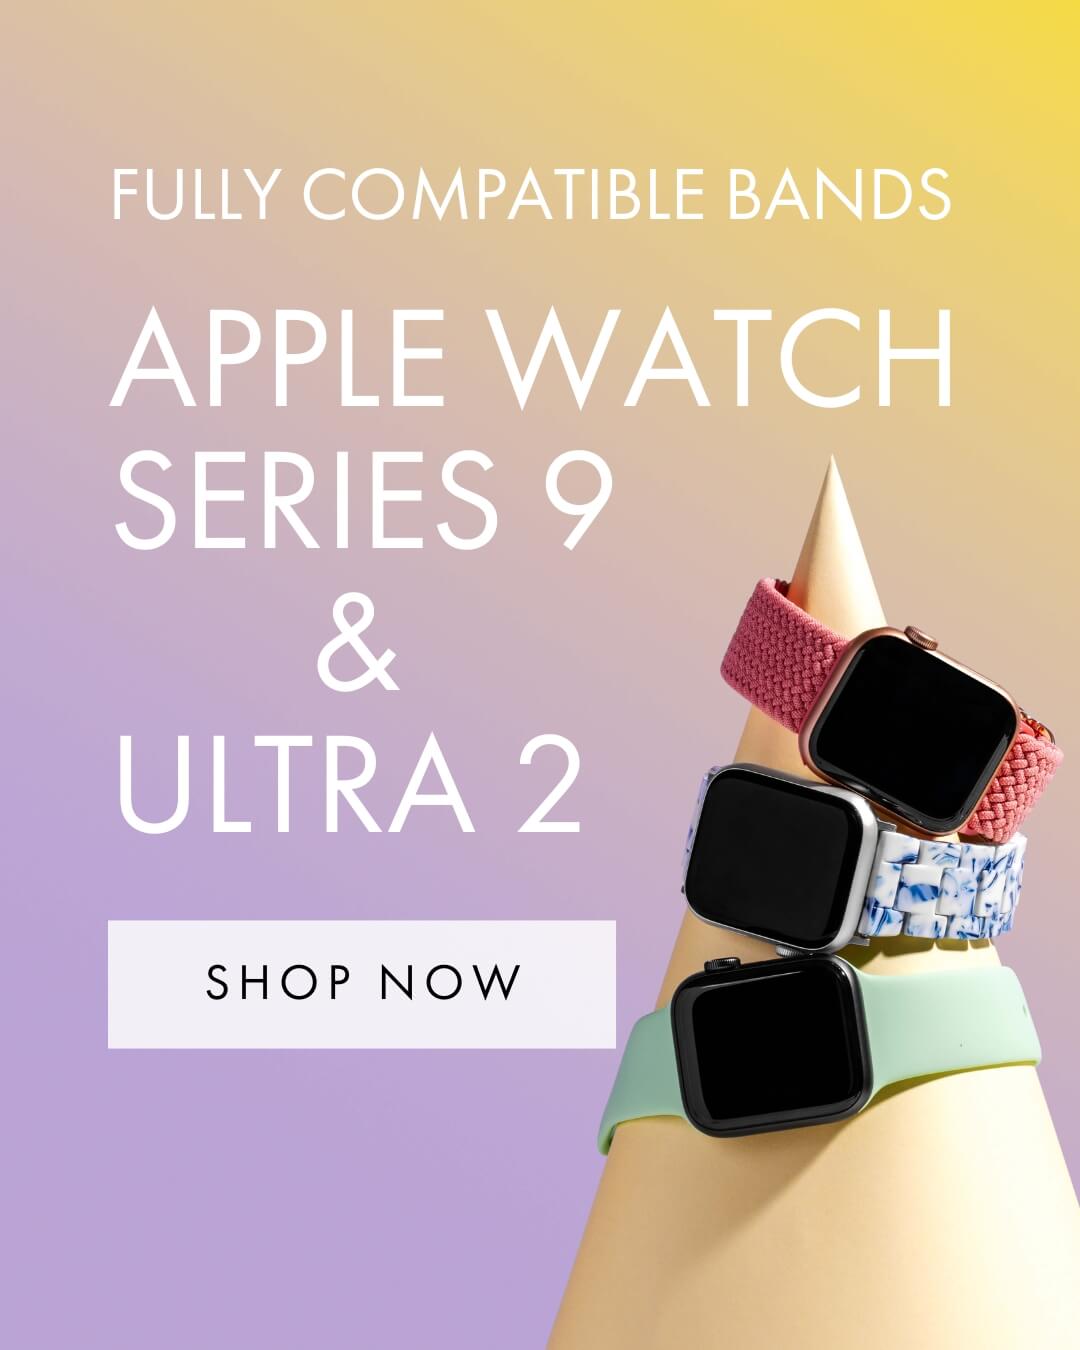 Silicone Apple Watch Band - Lilac - The Salty Fox